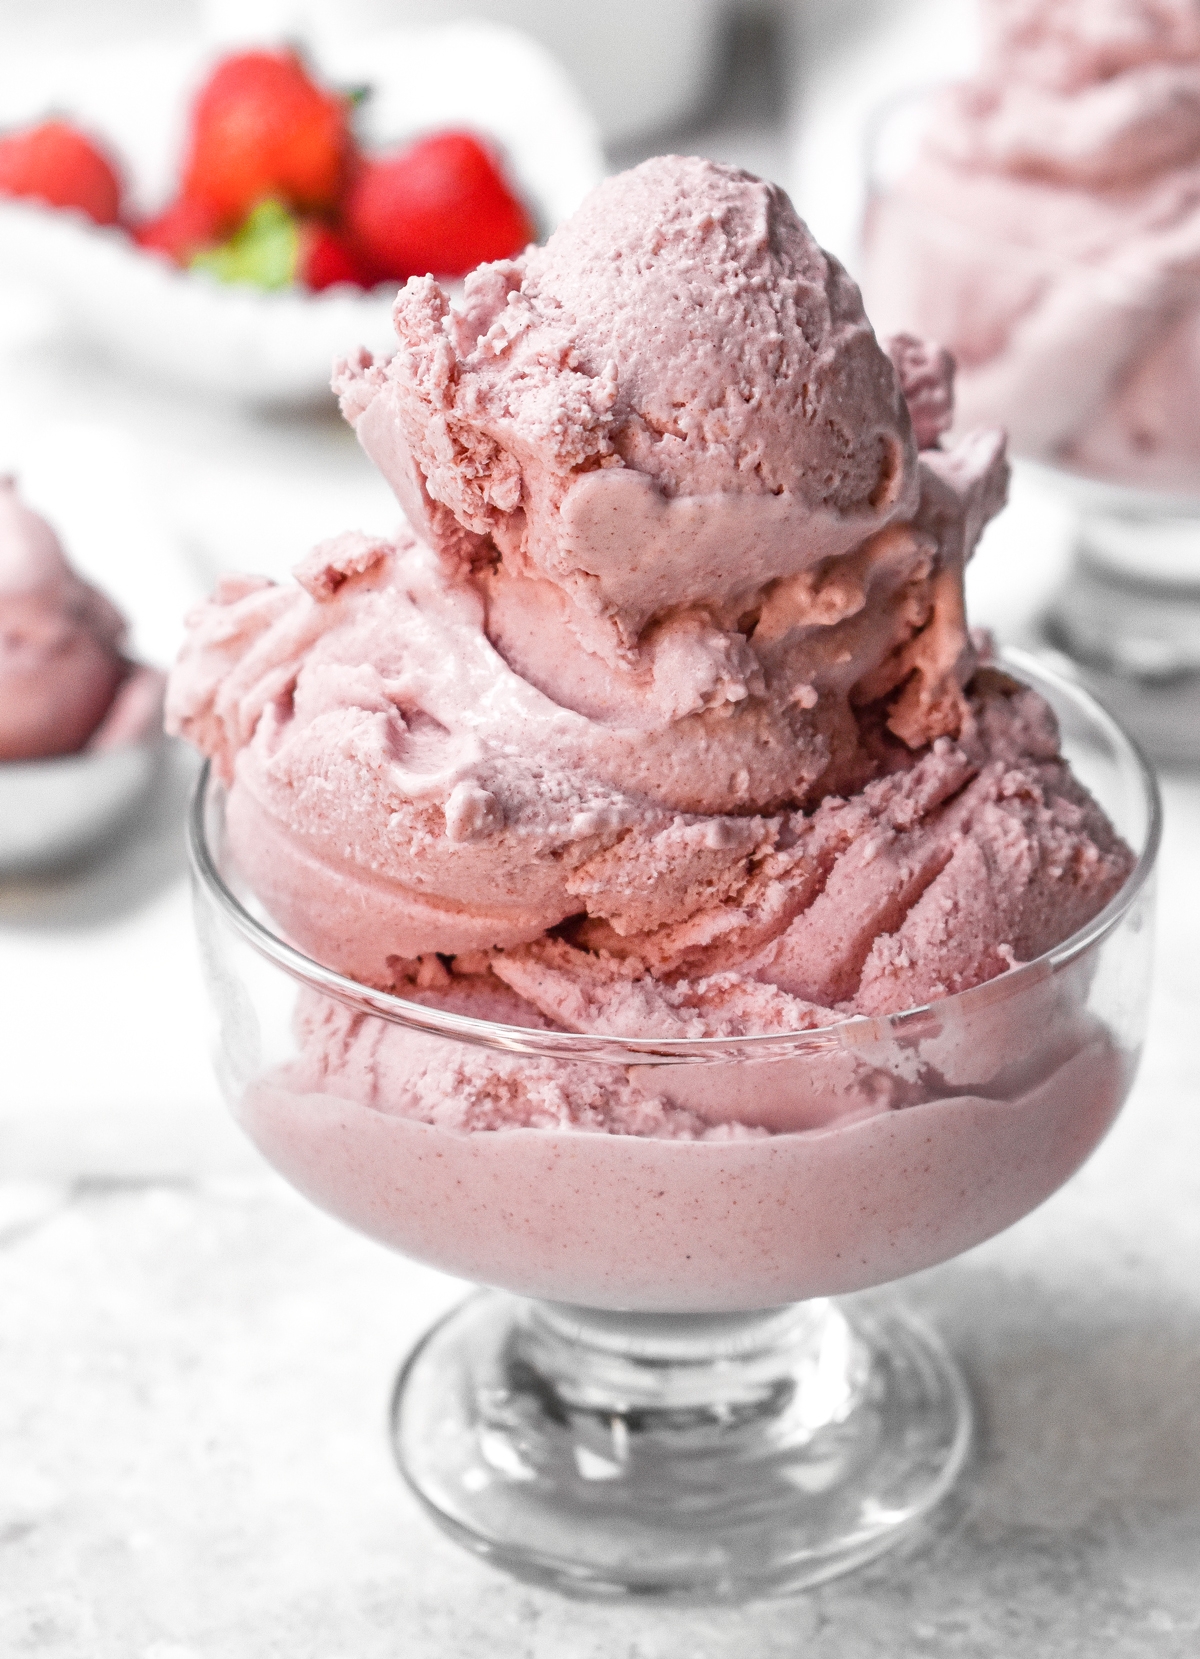 the healthy vegan strawberry ice cream scooped into a bowl